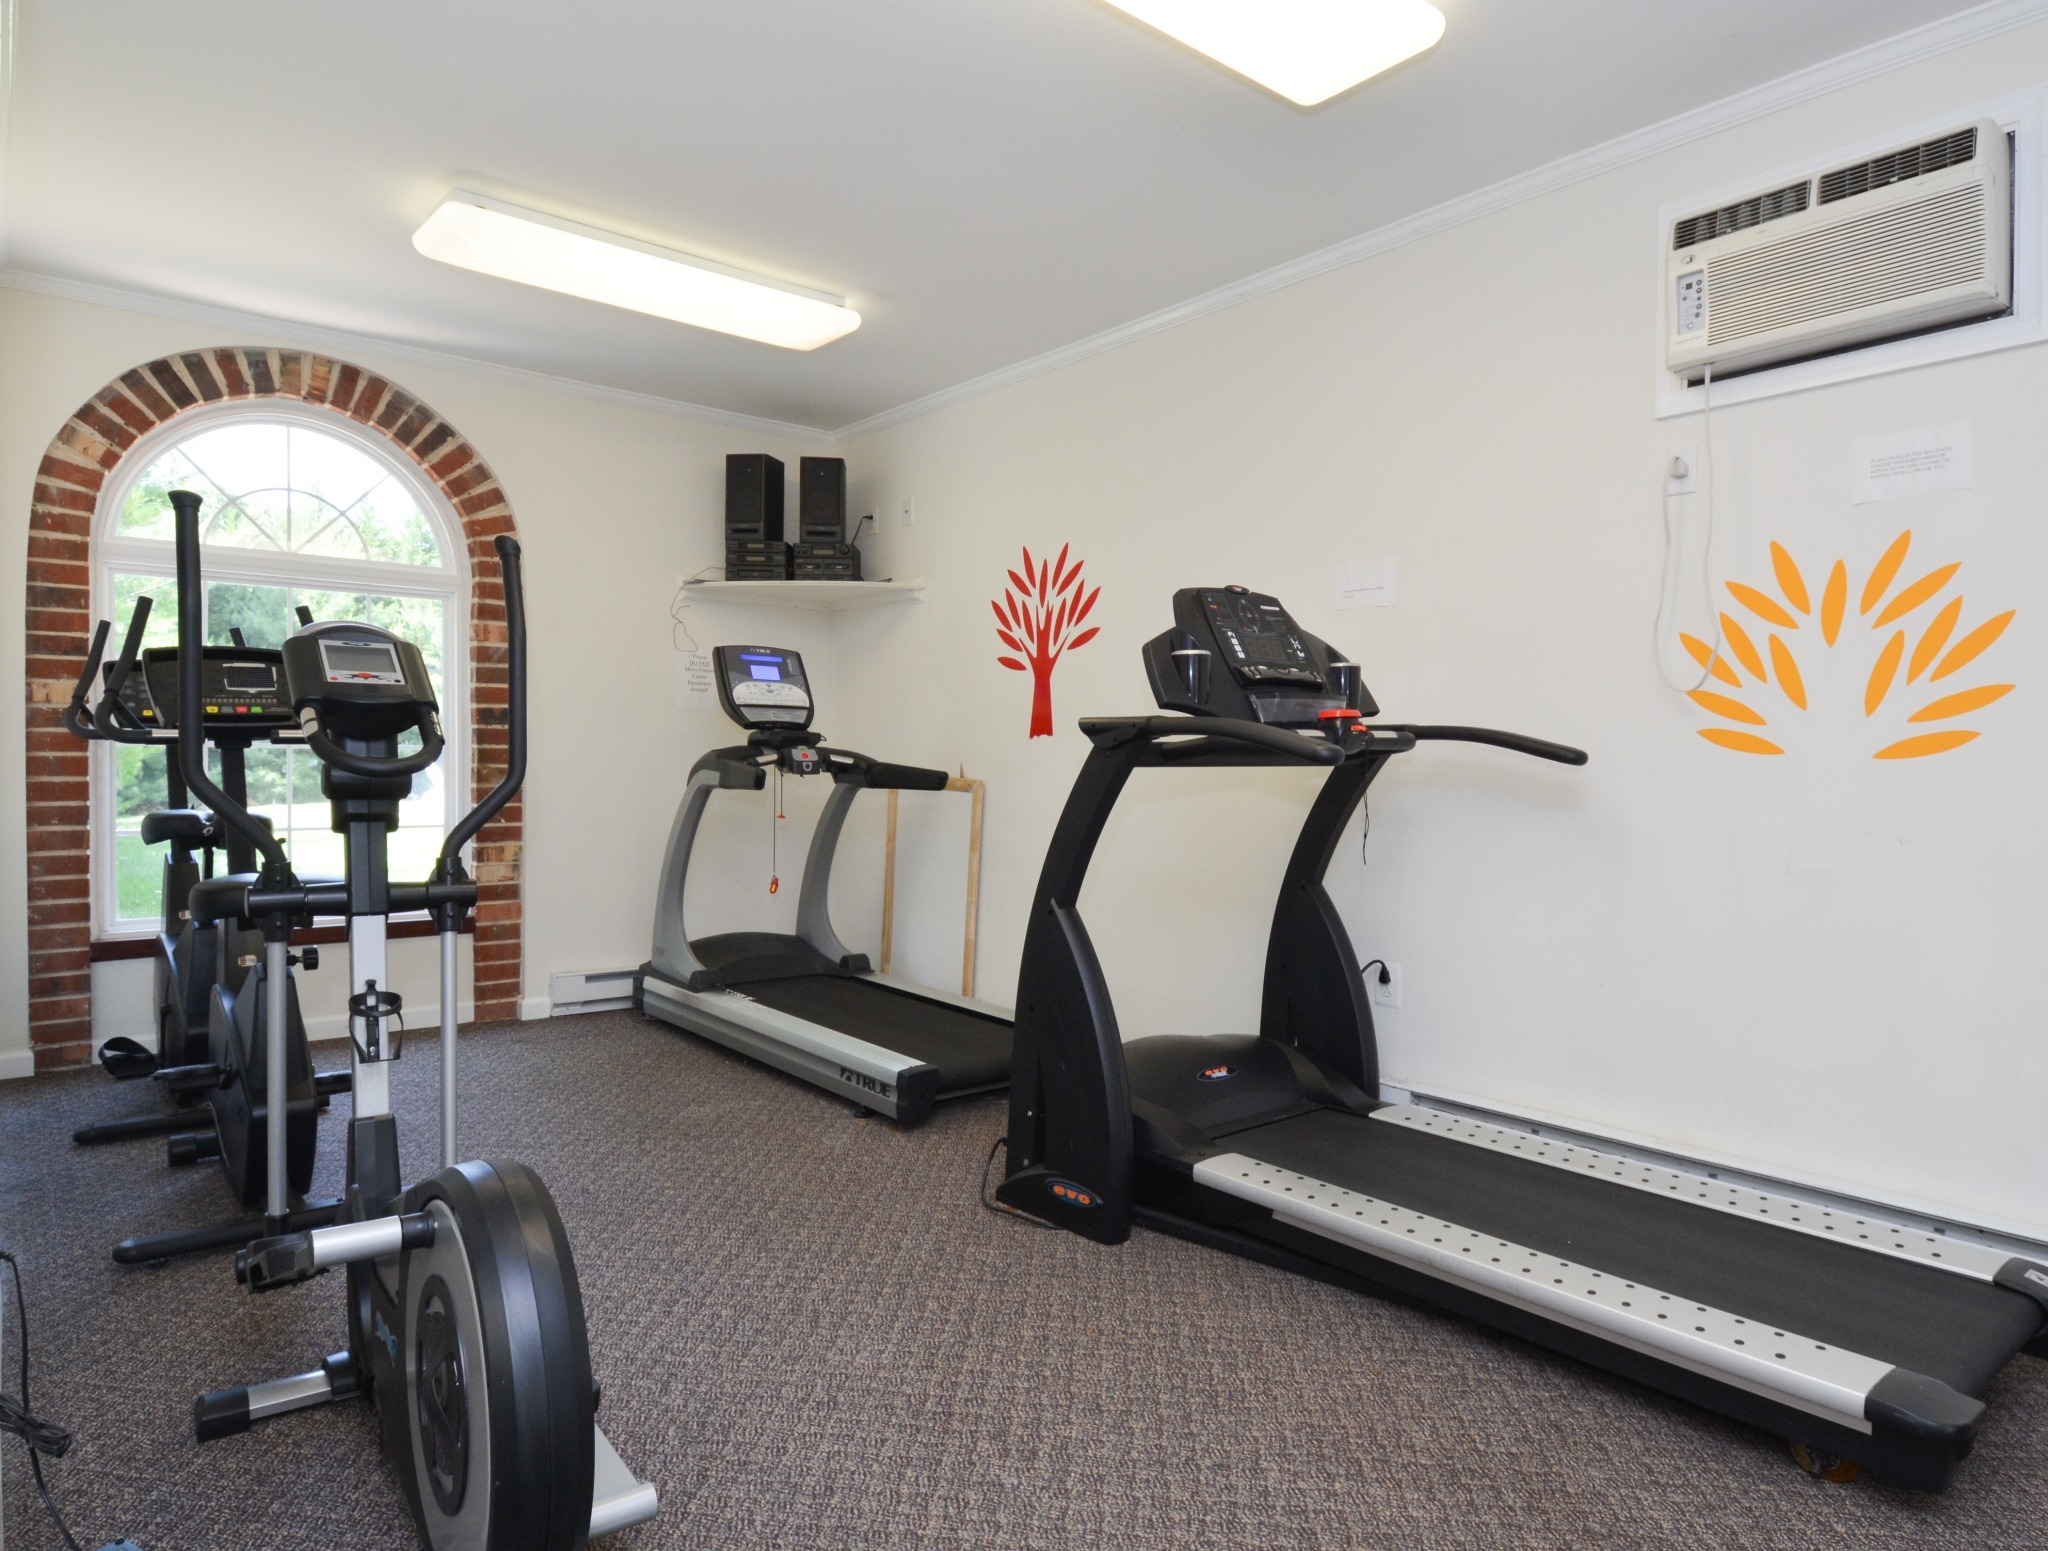 Rolling Glen fitness room with carpeting and a window